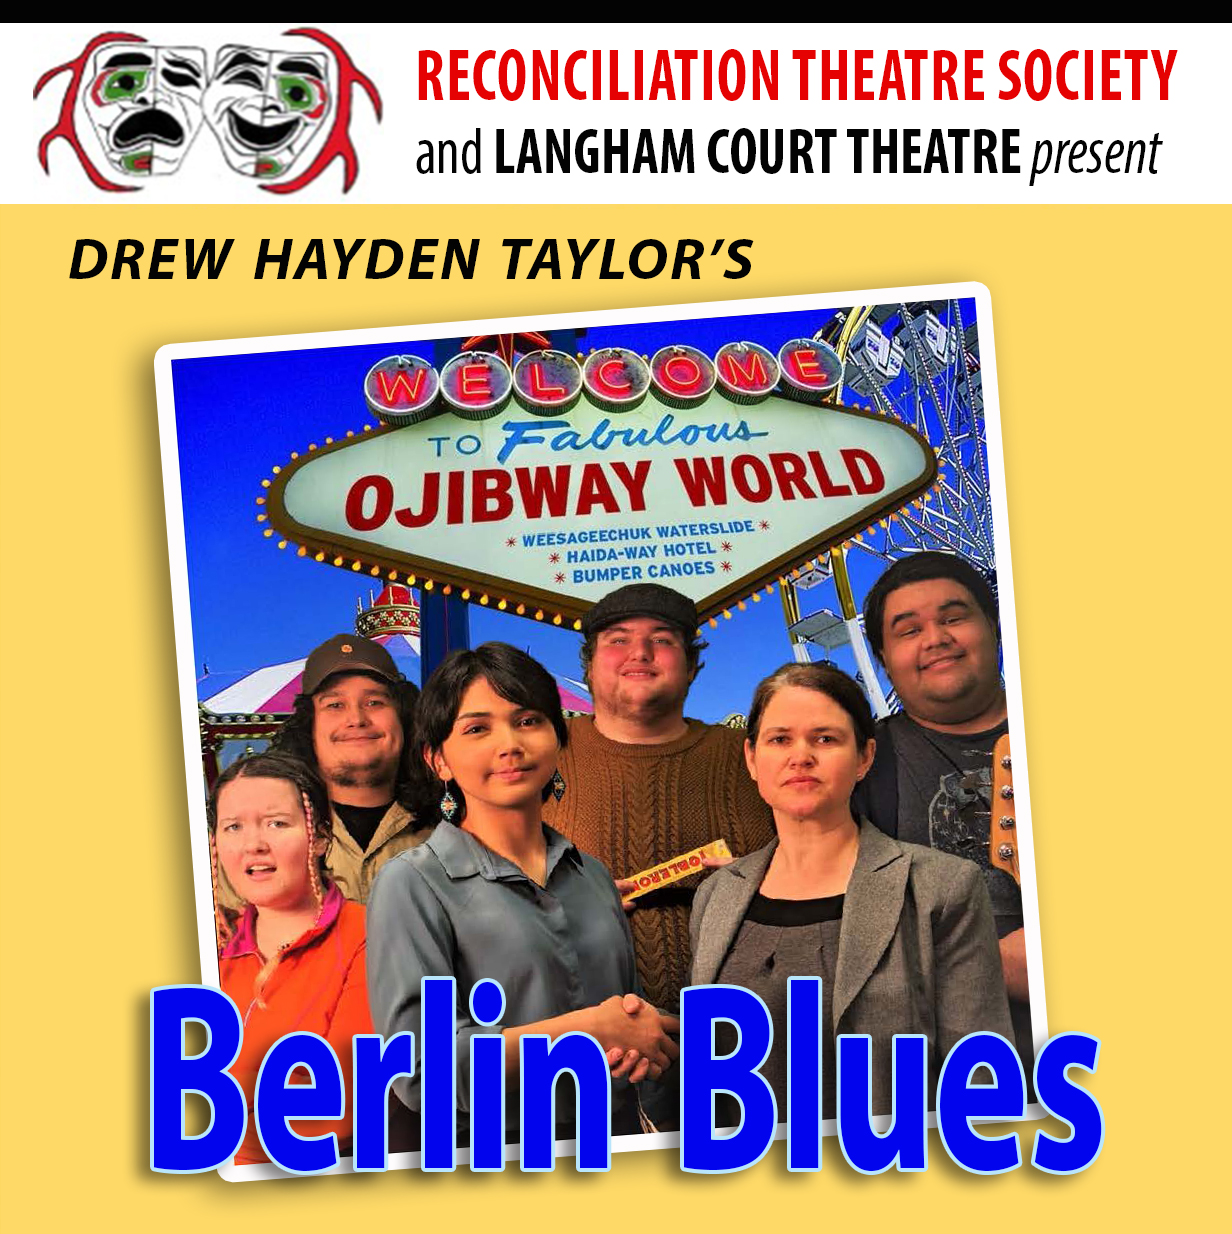 The Berlin Blues at Langham Court Theatre